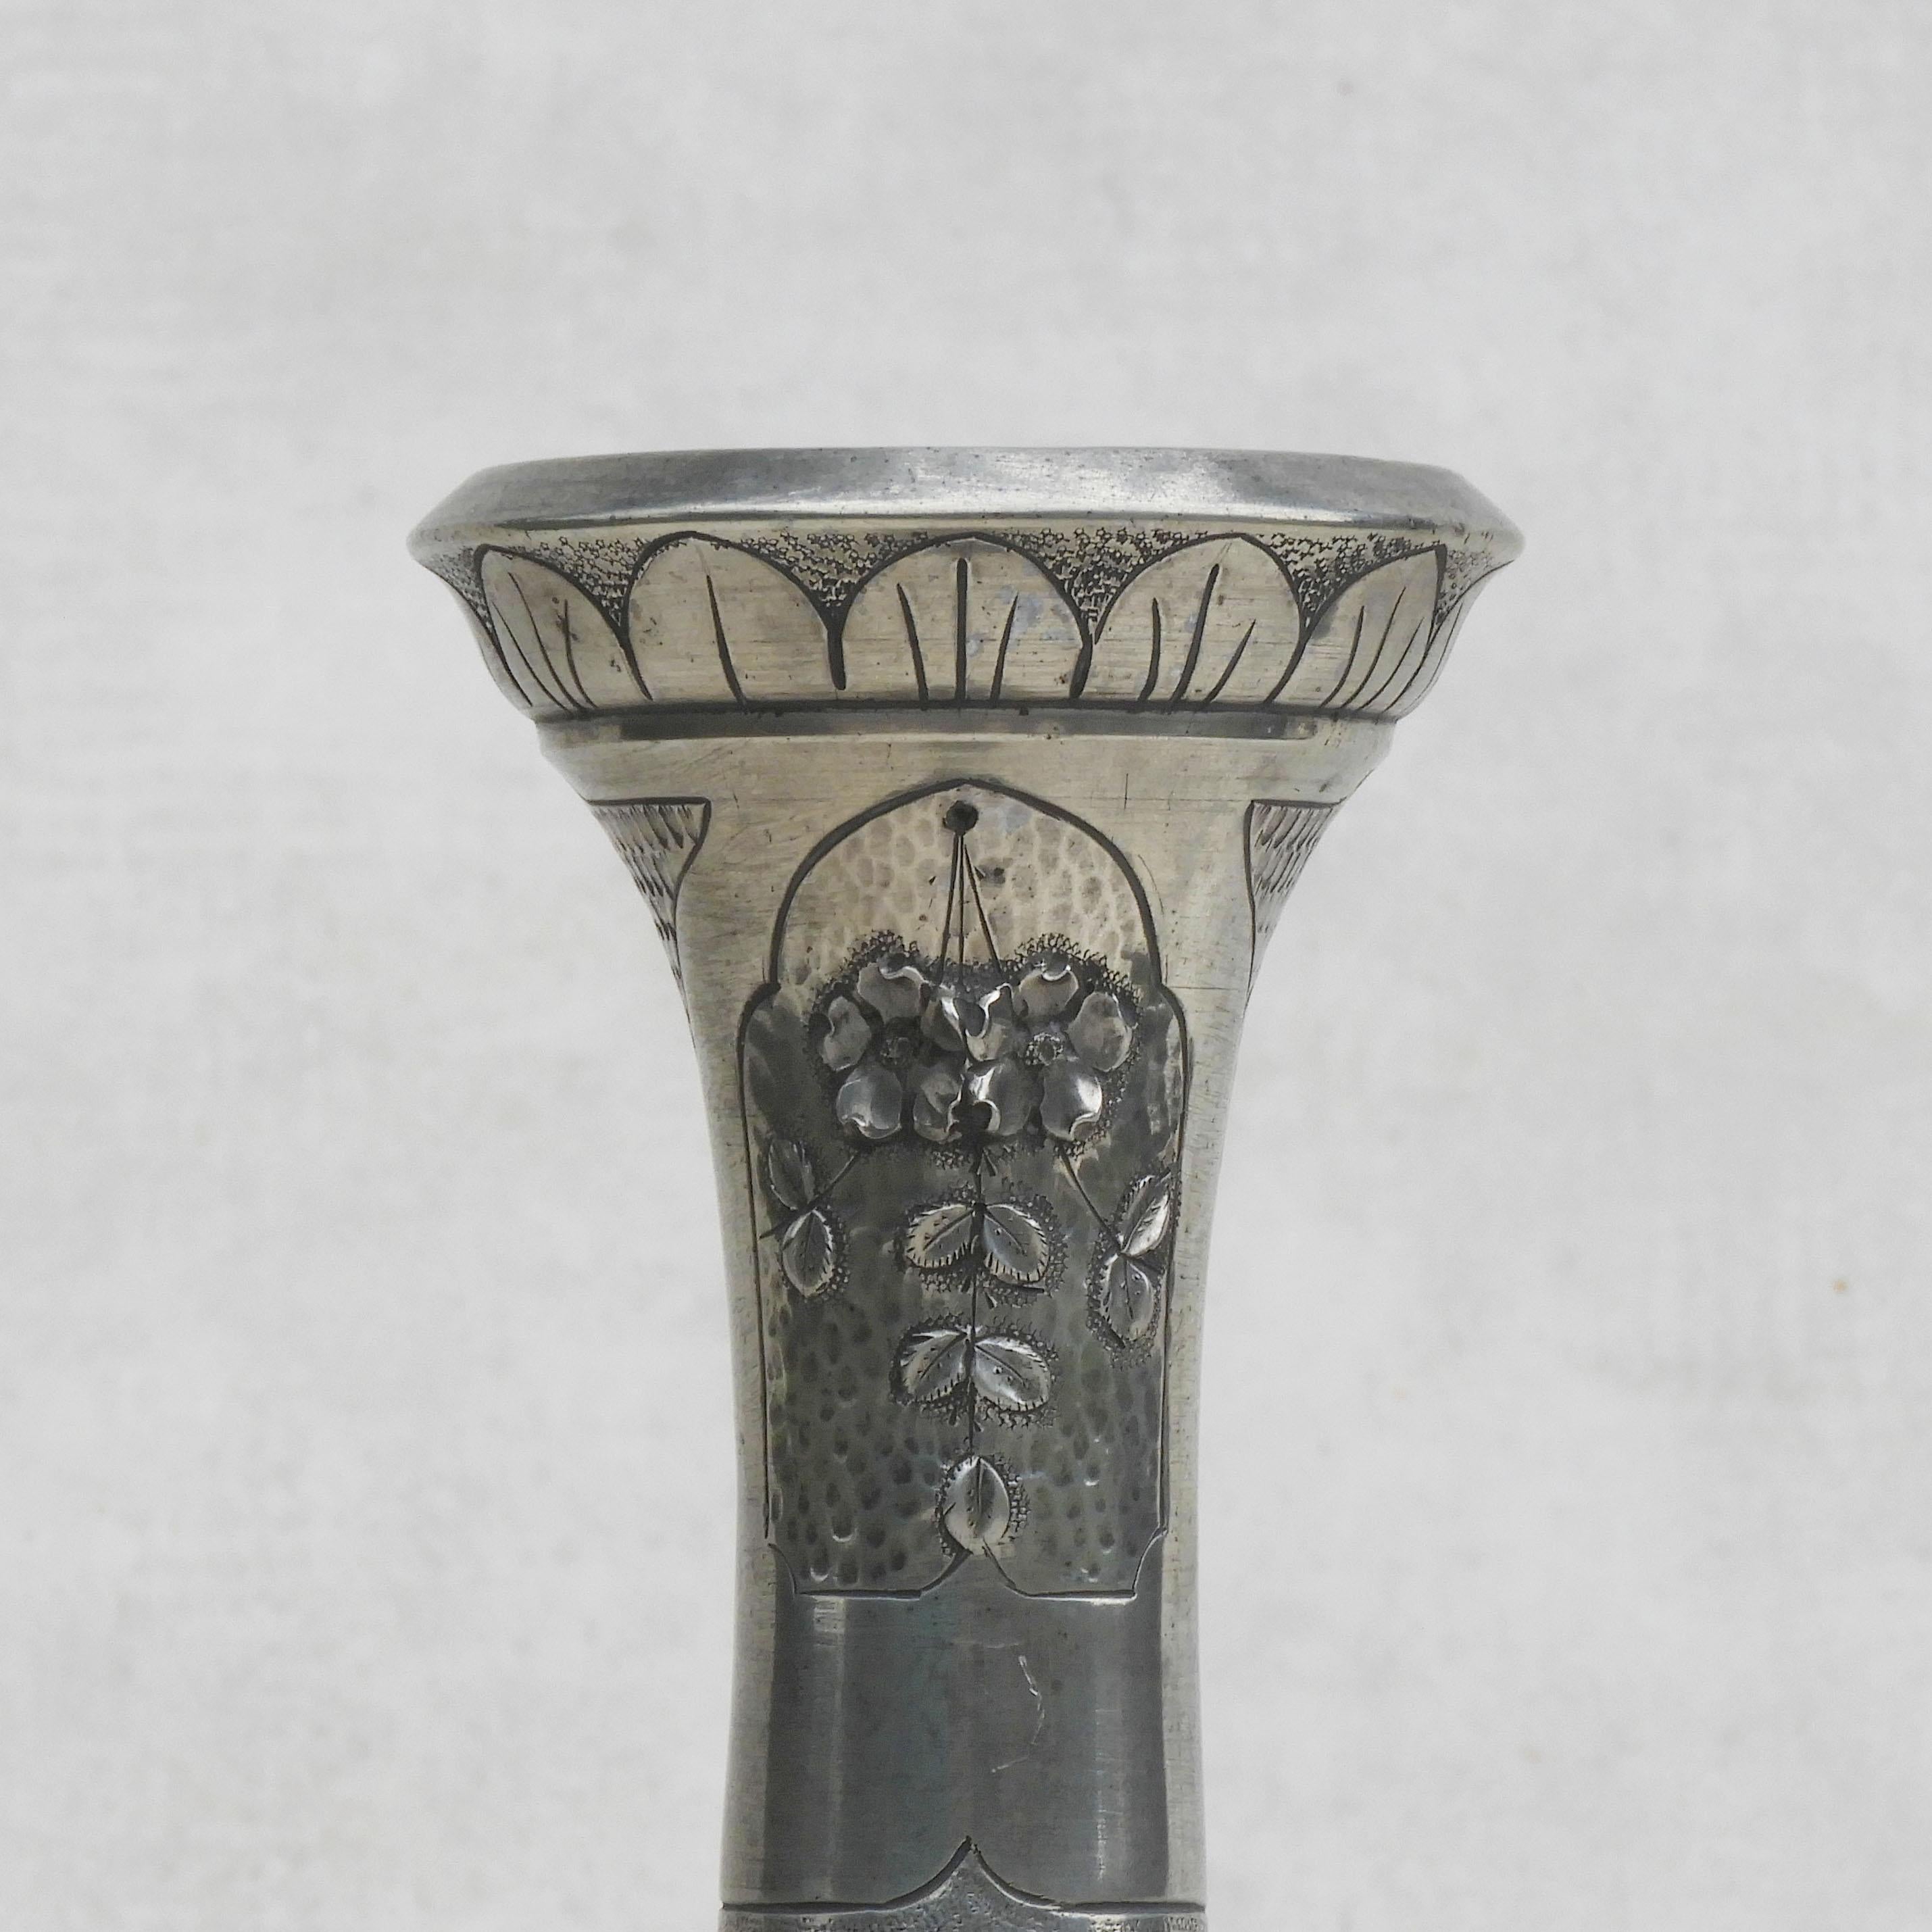 Pewter Monumental Belle Epoque Vase by André Villien, c1900 FREE SHIPPING